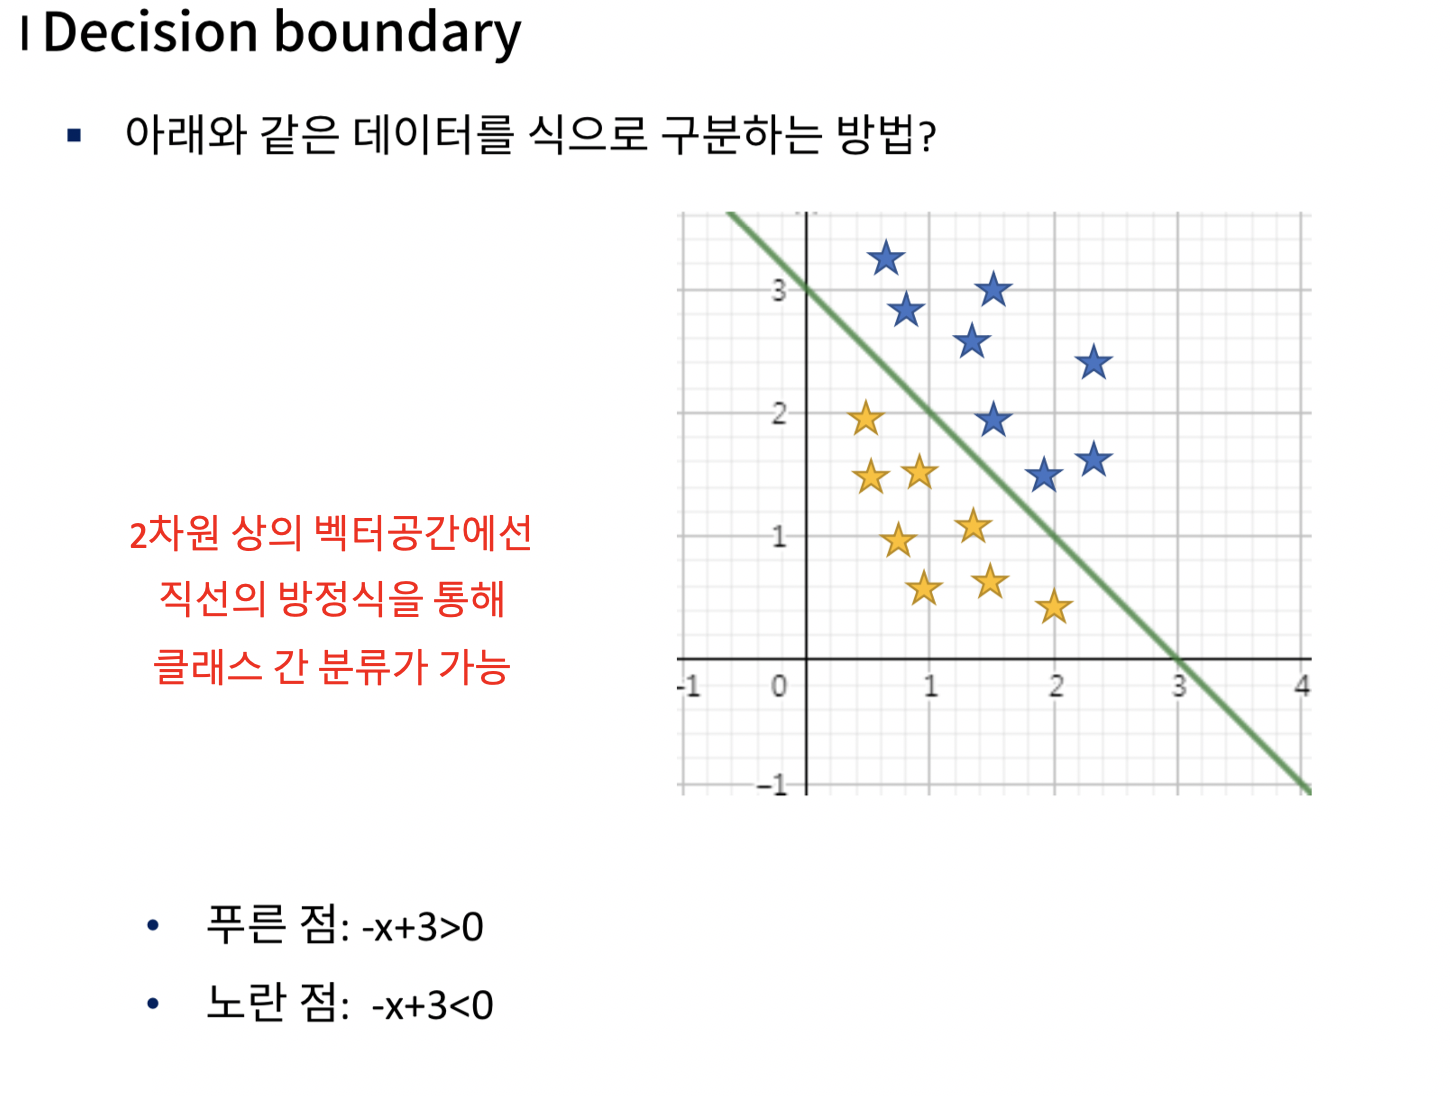 Support Vector Machine의 Decision boundary - 01